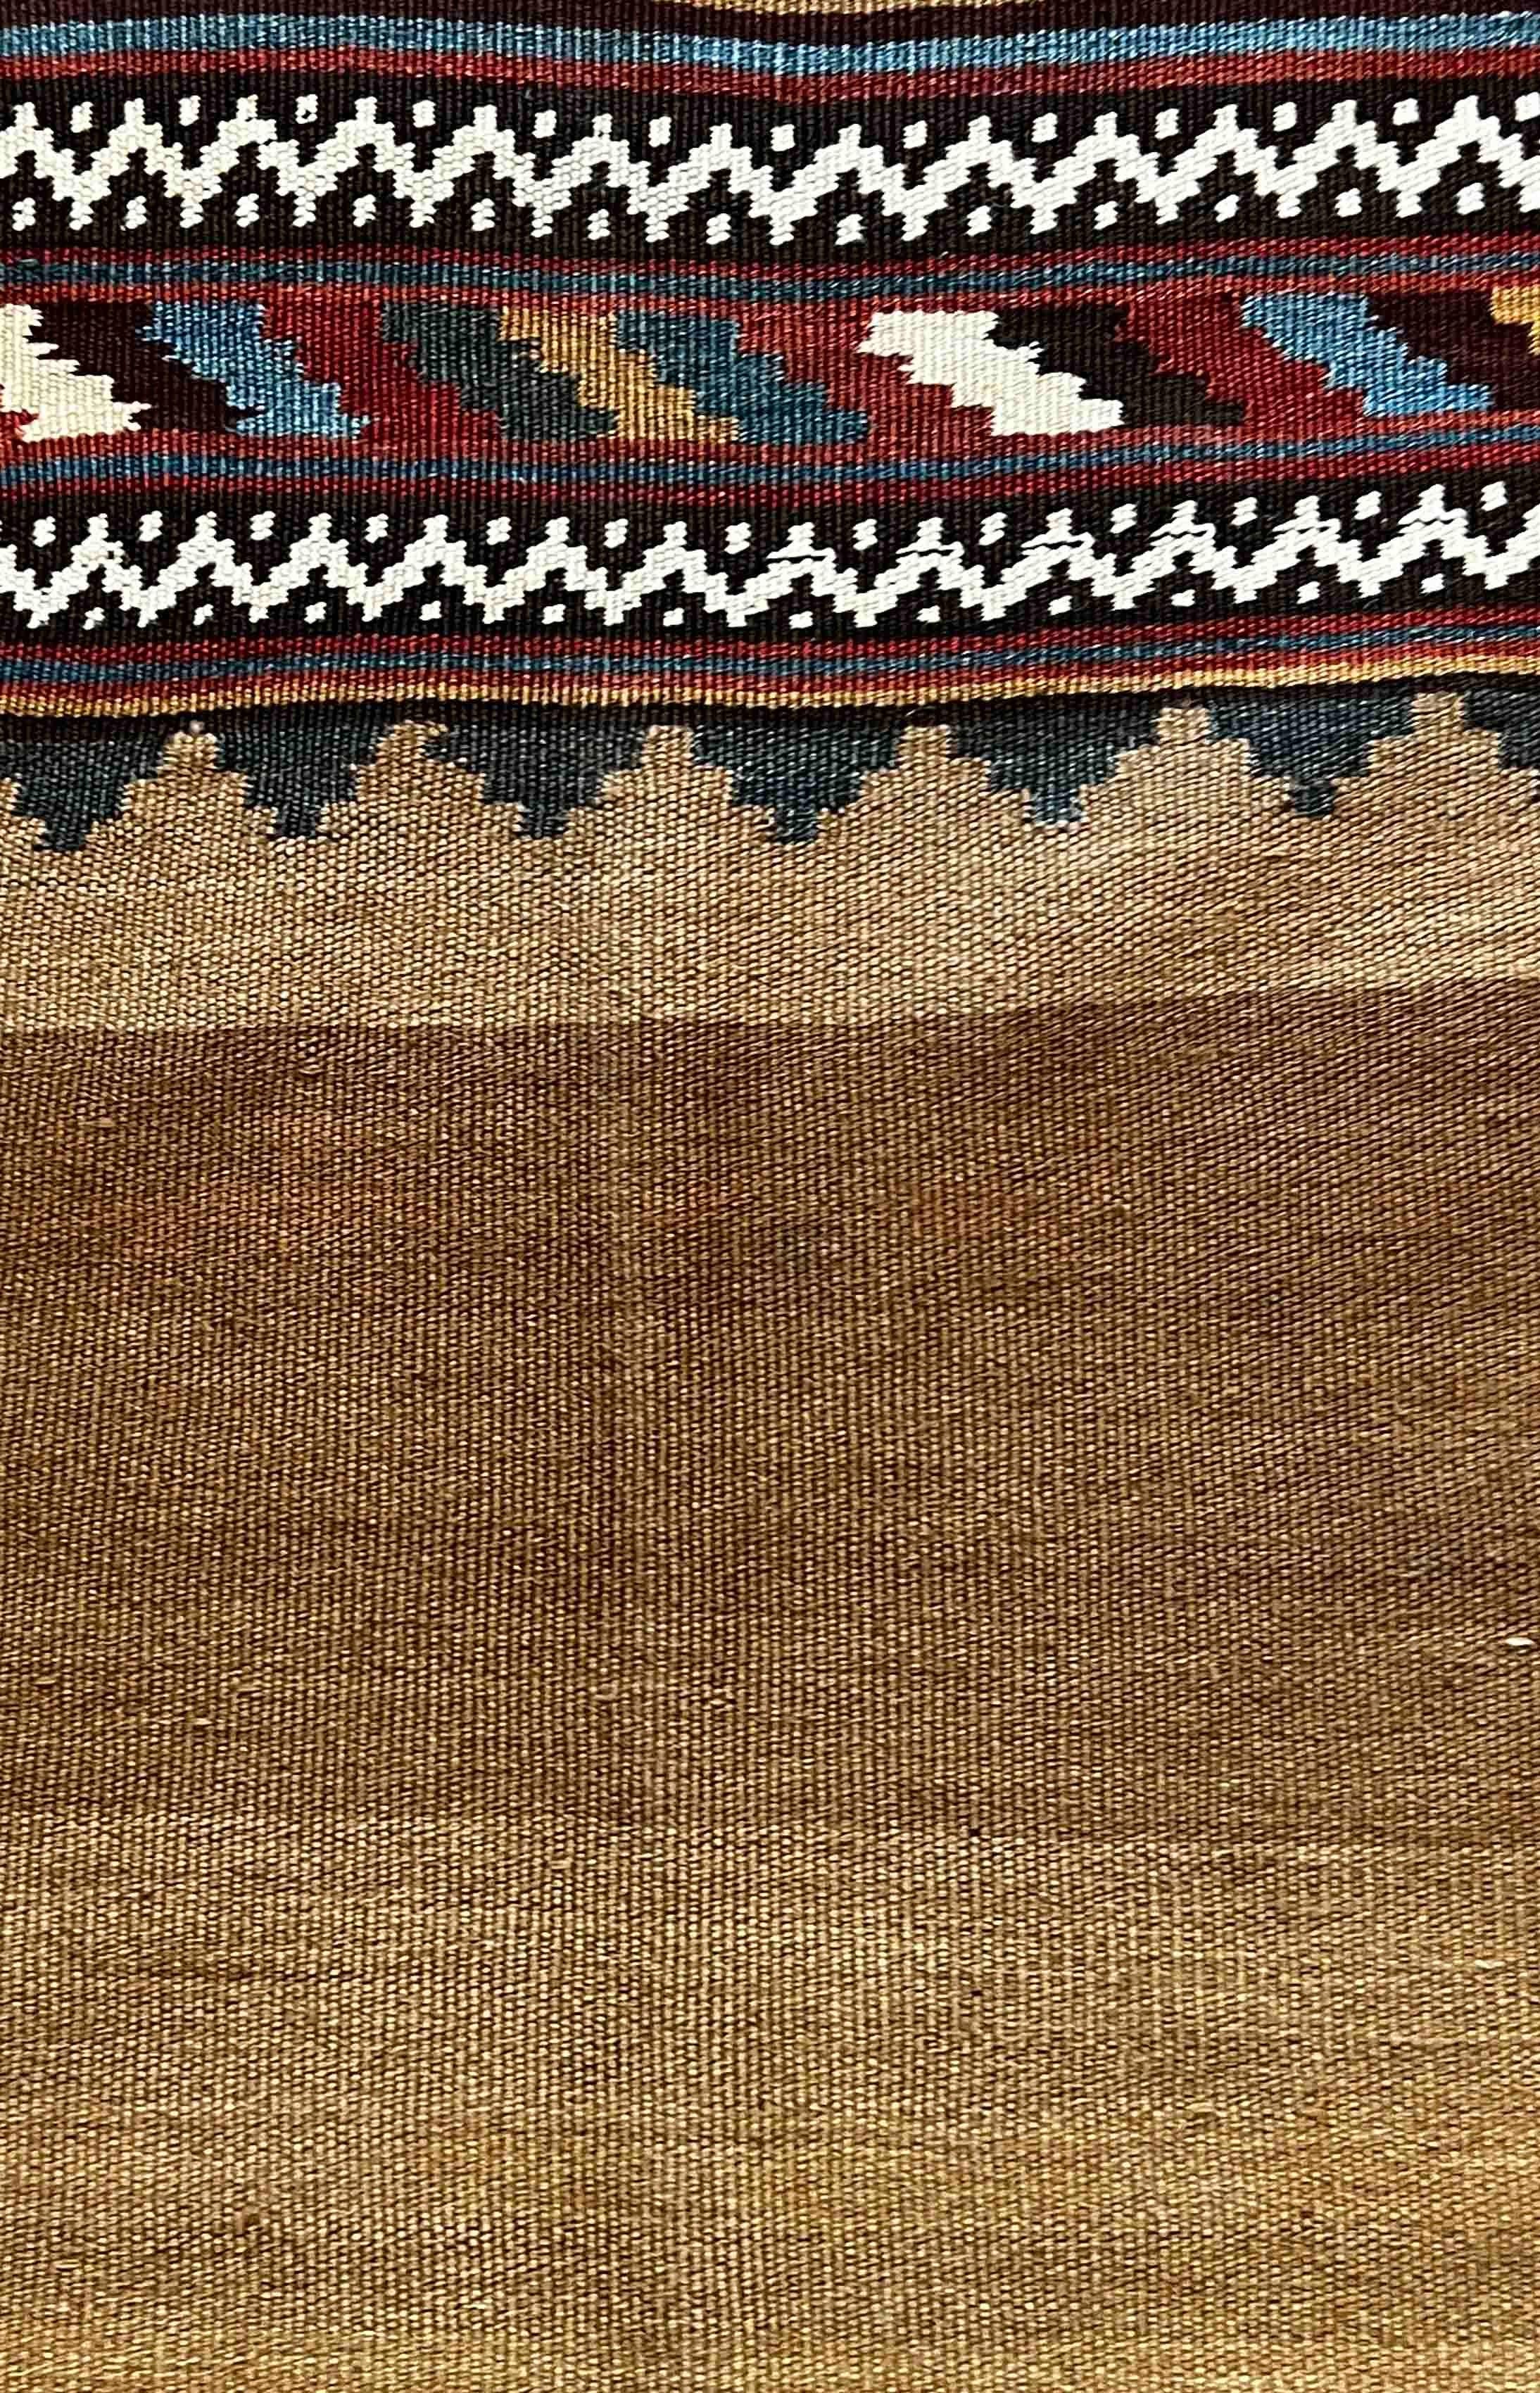 Sofreh Kilim Rug 19th Century - 165x120 - No. 702 In Excellent Condition For Sale In Paris, FR